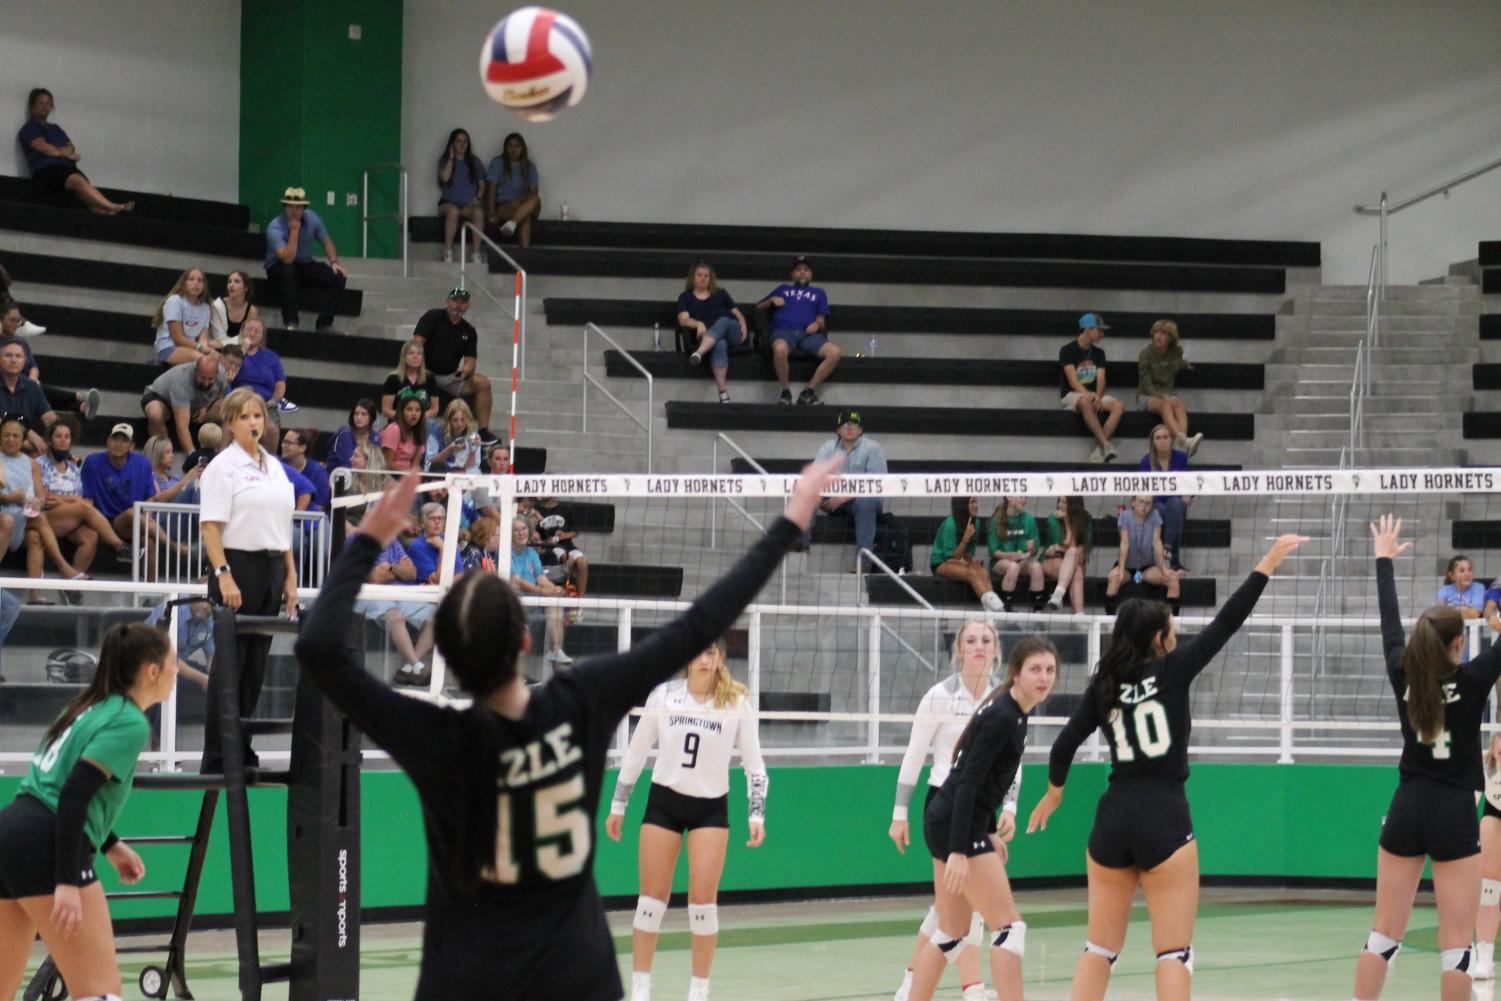 Azle Volleyball Player Wins Player of the Week – The Sting